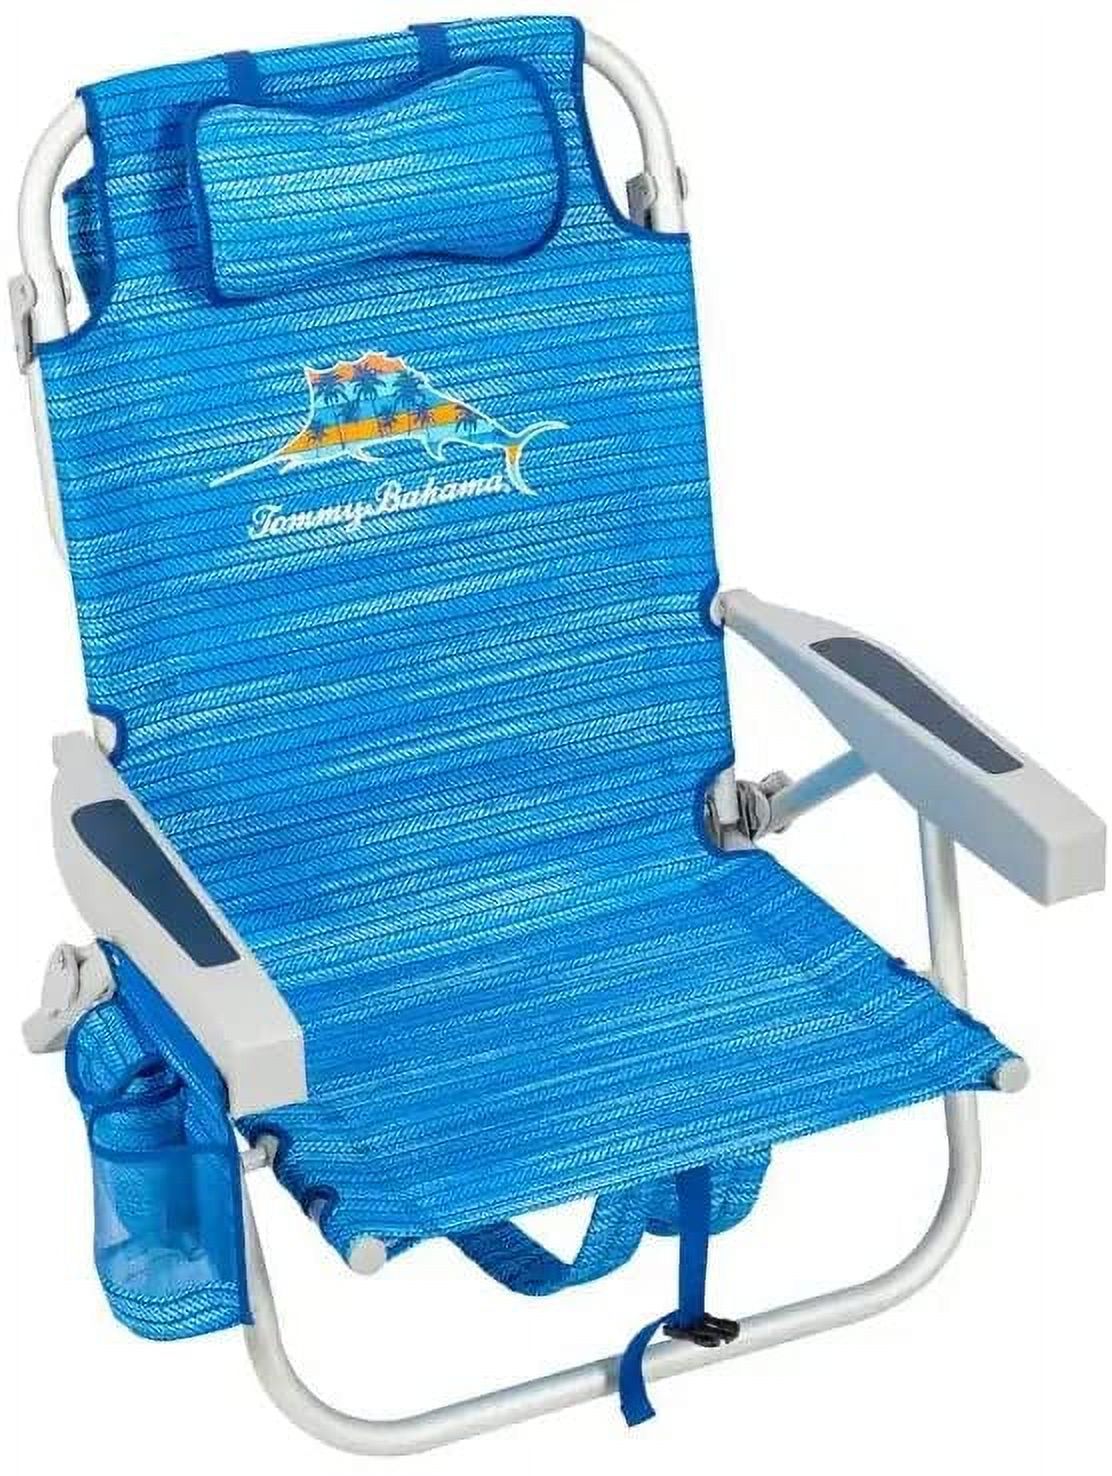 Tommy Bahama 5 Position Sailfish and Palms Backpack Beach Chair - image 1 of 4